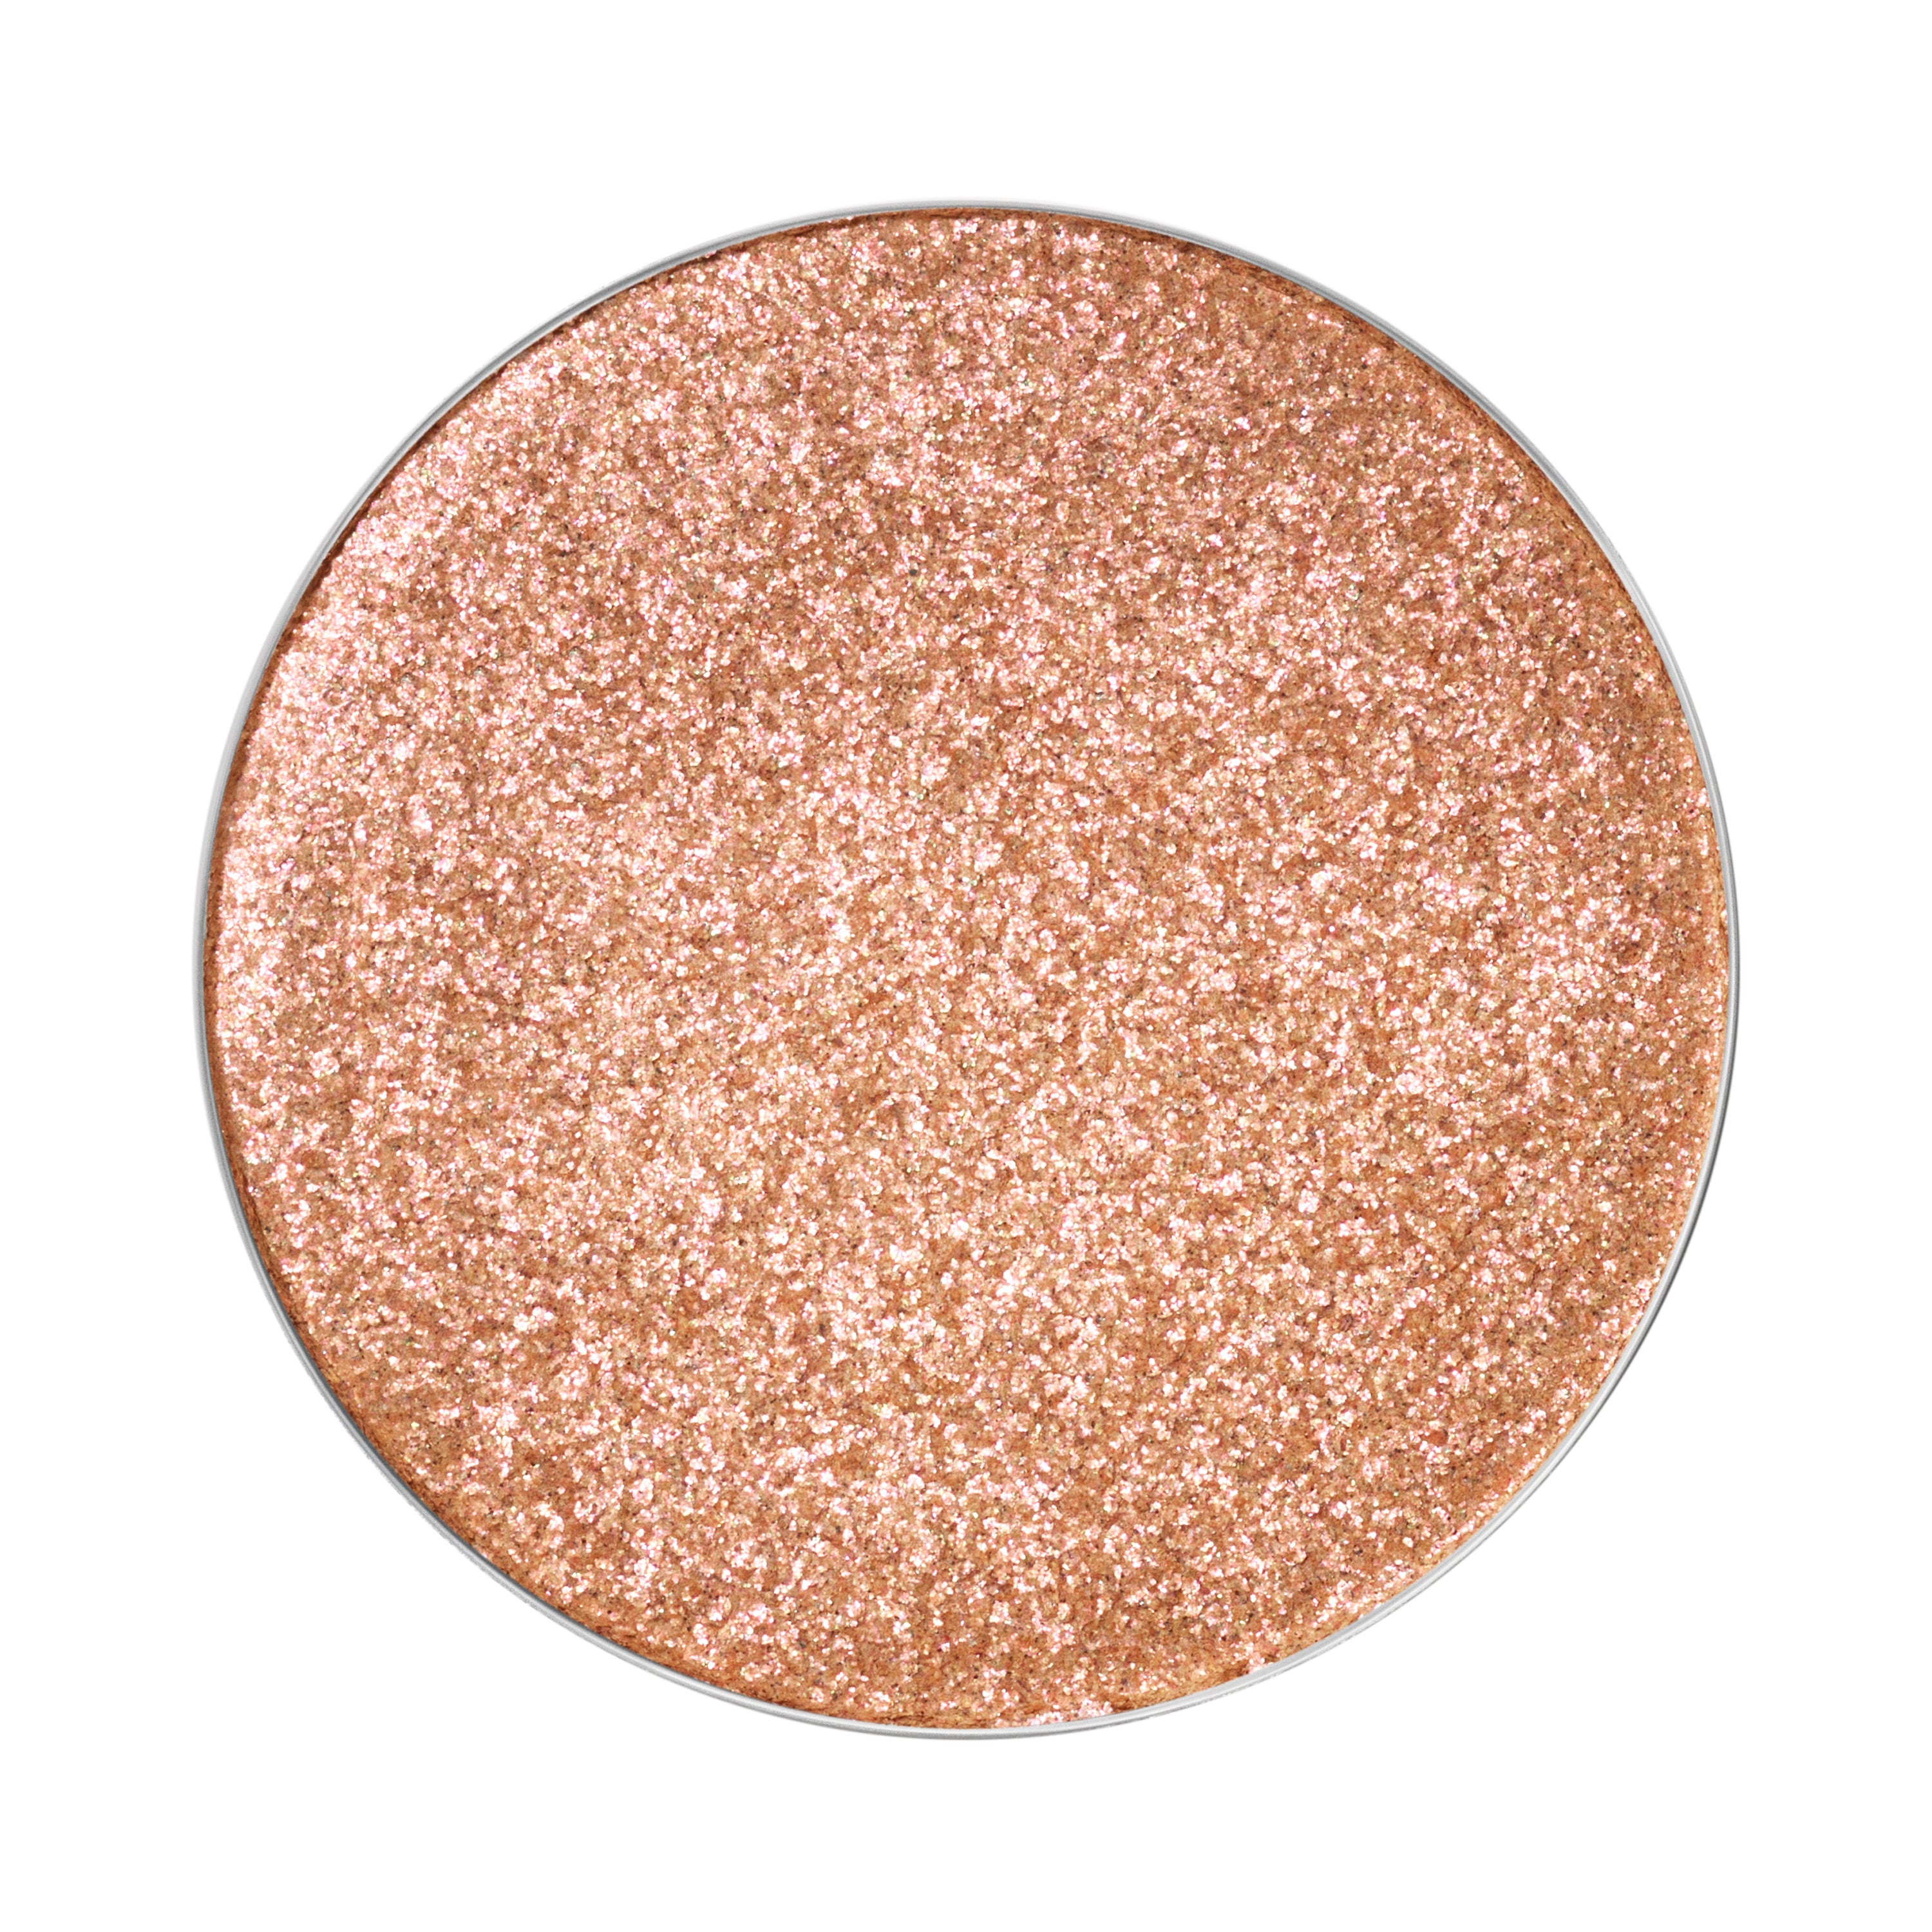 M·A·C Dazzleshadow Extreme (Pro Palette Refill Pan)